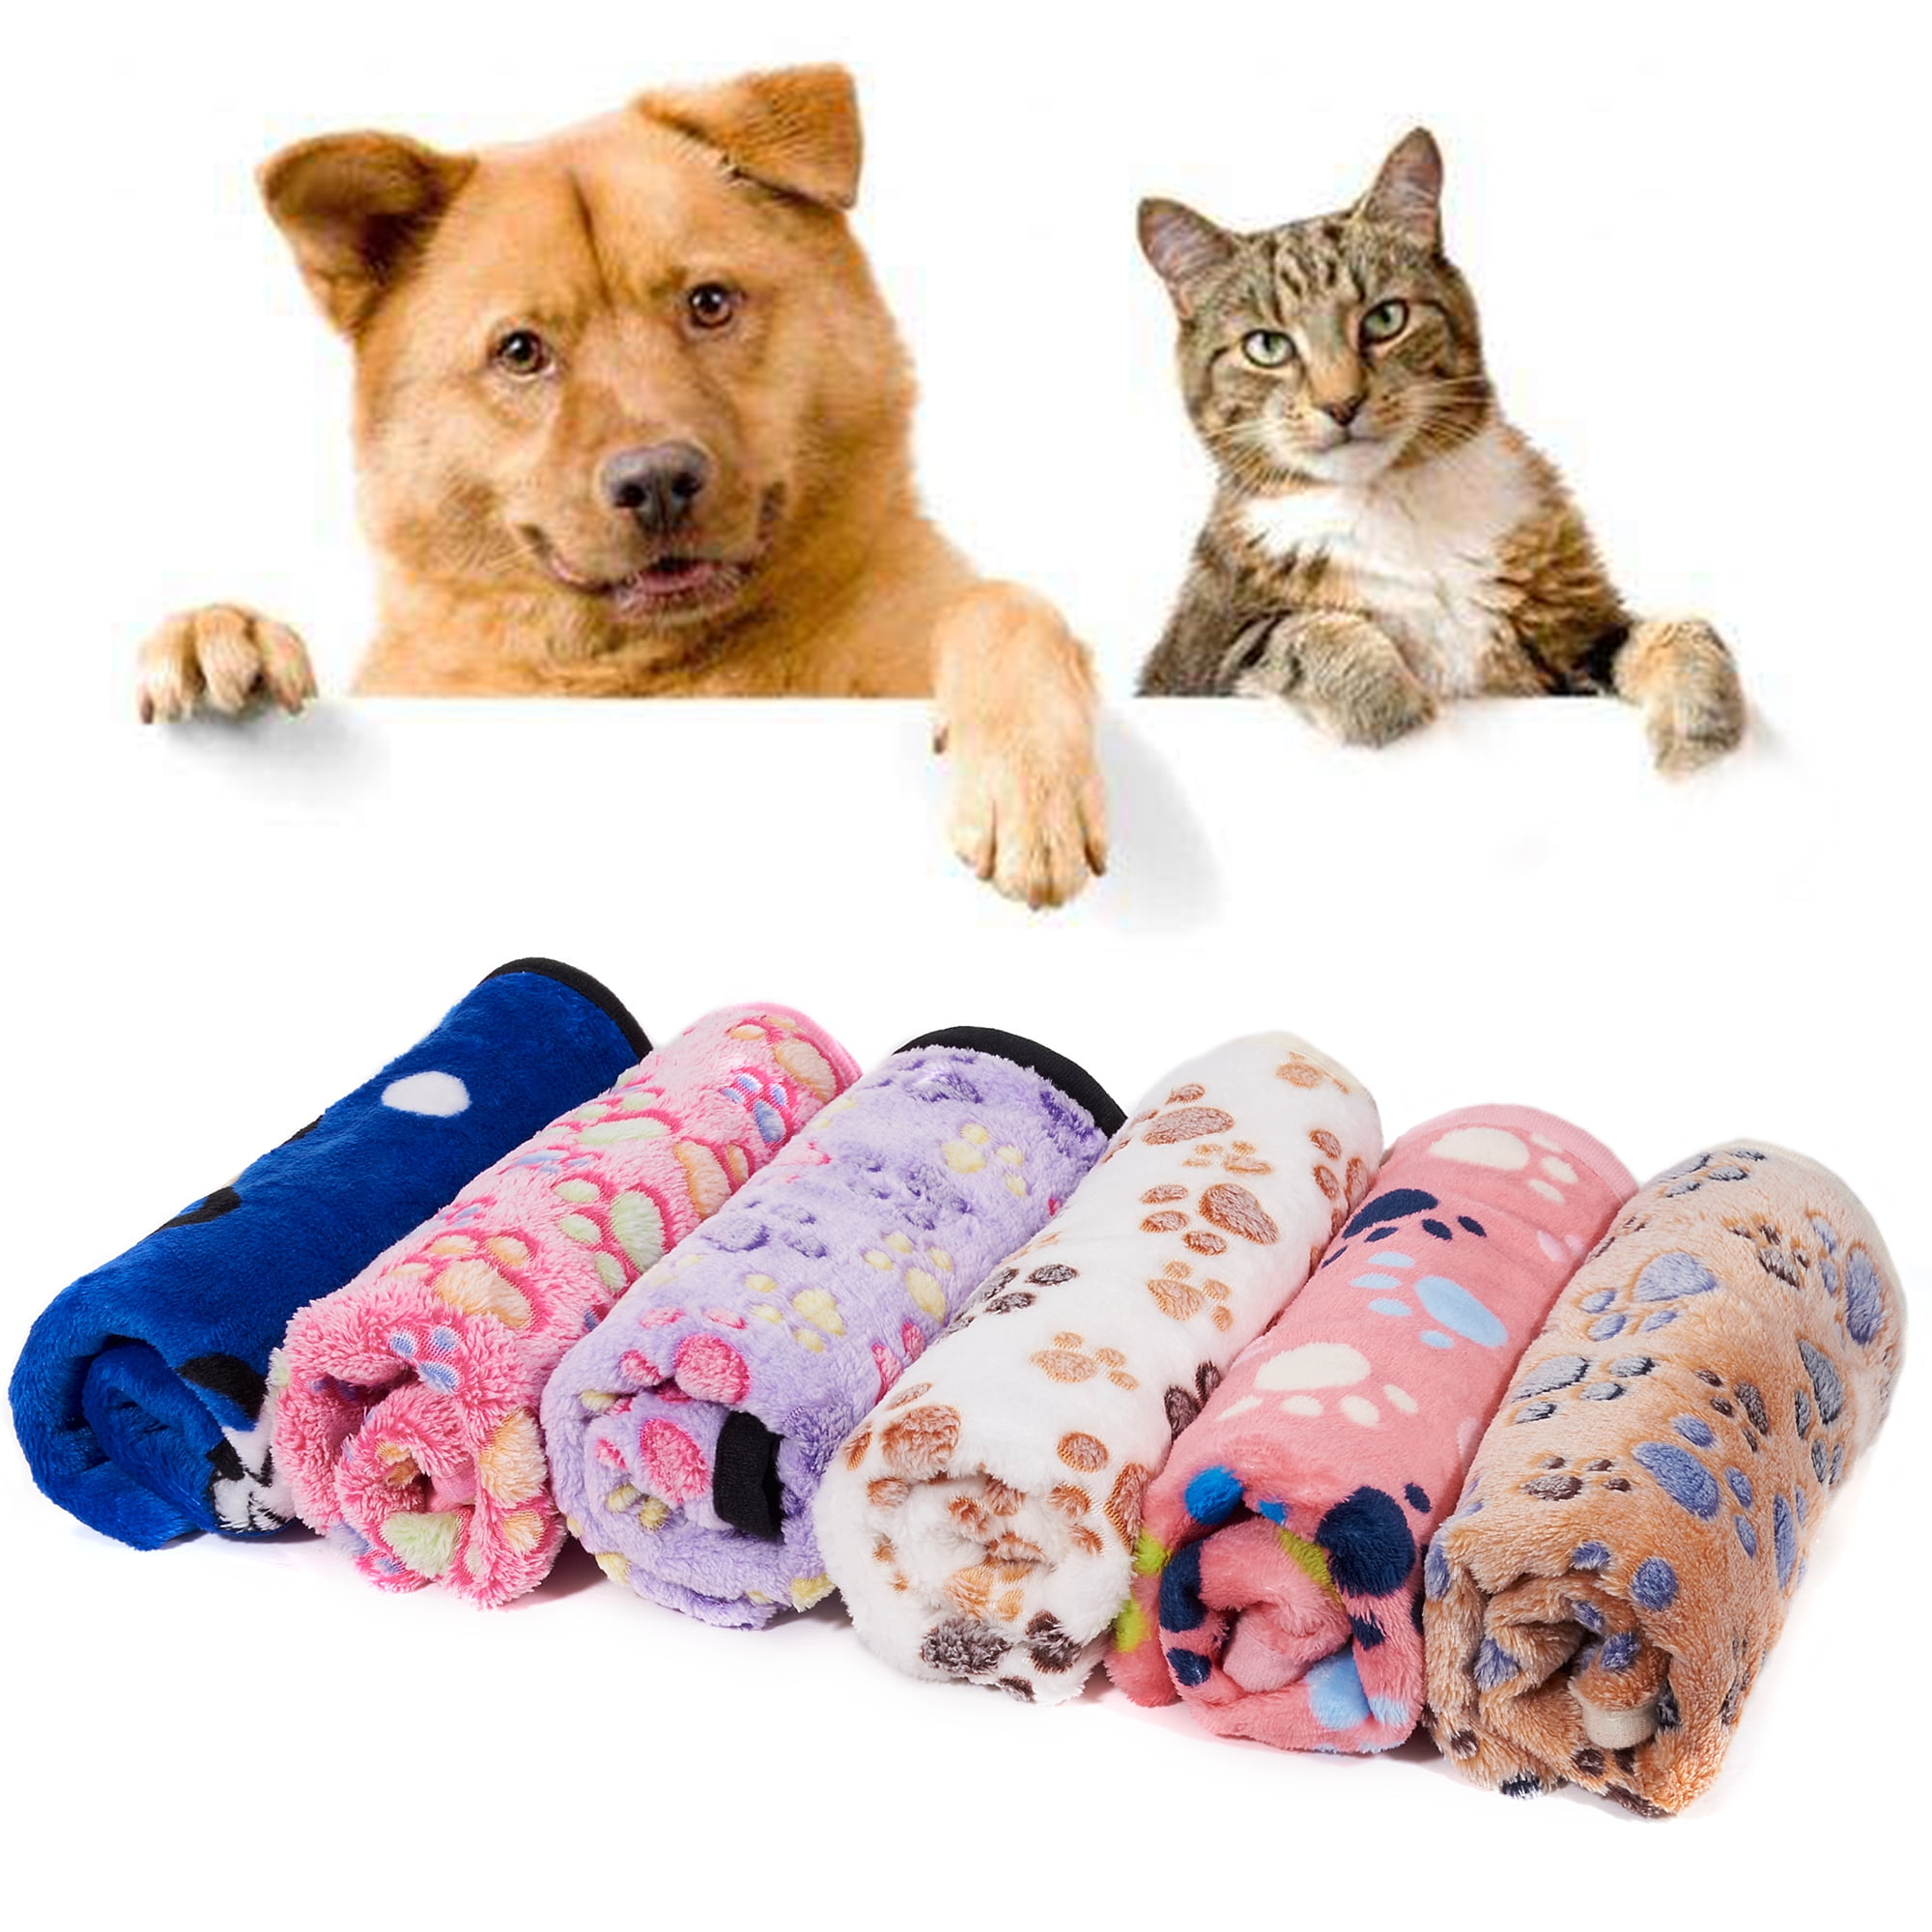 Dog Blanket Super Soft Mat 2 Pack Fluffy Lightweight Washable Fuzzy Fleece Pet Blankets for Puppy Cats Small Dogs Indoor 